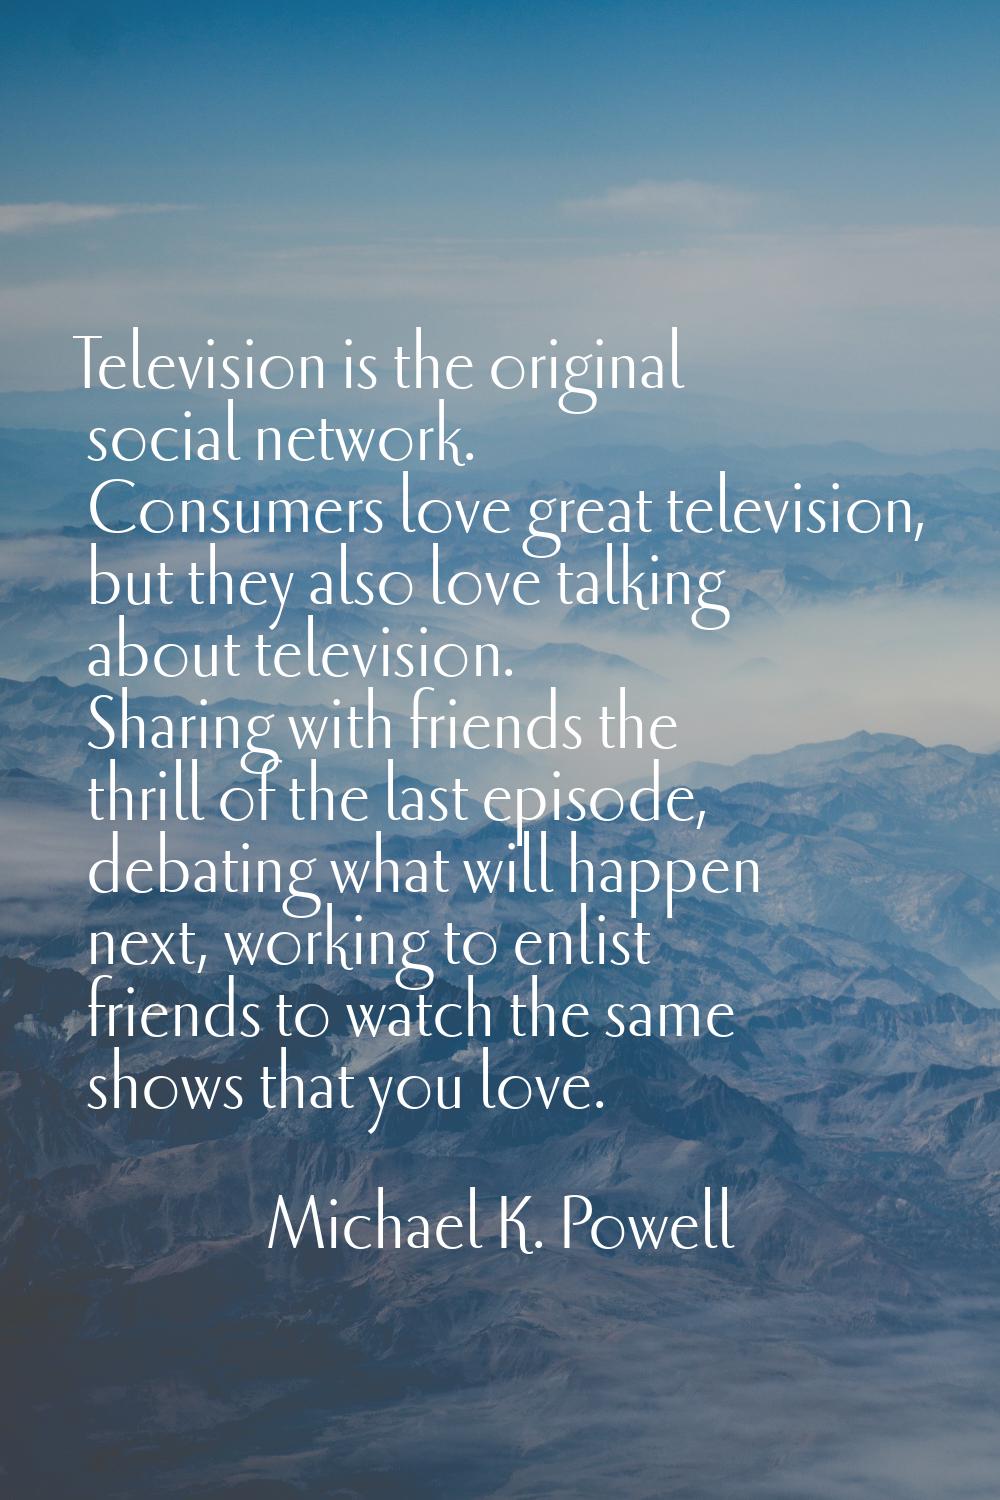 Television is the original social network. Consumers love great television, but they also love talk